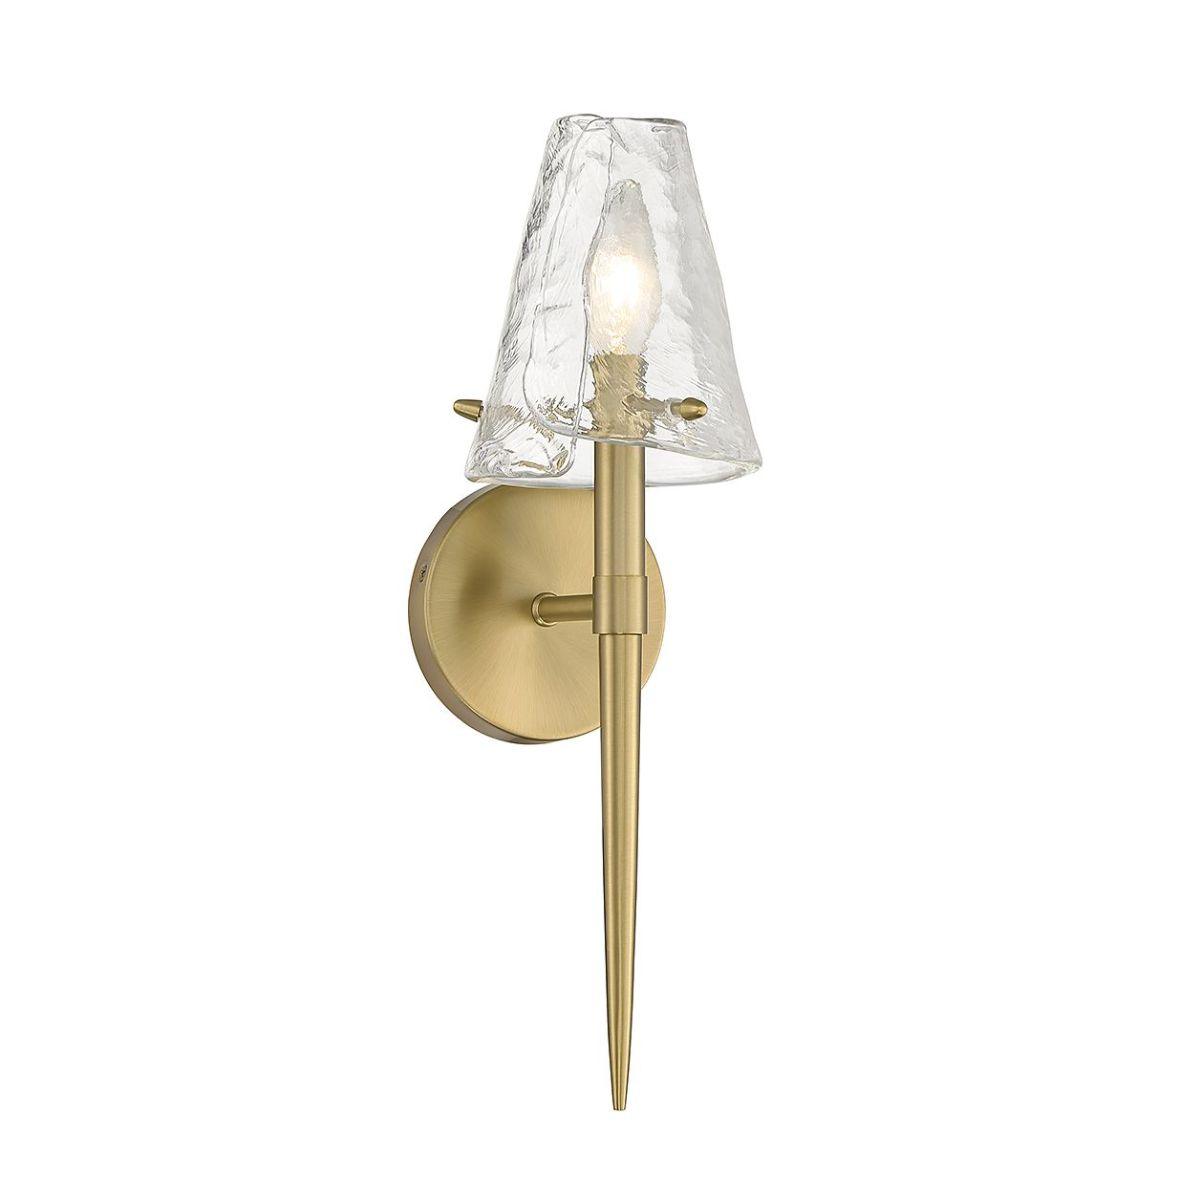 Shellbourne 17 in. Armed Sconce Brass Finish